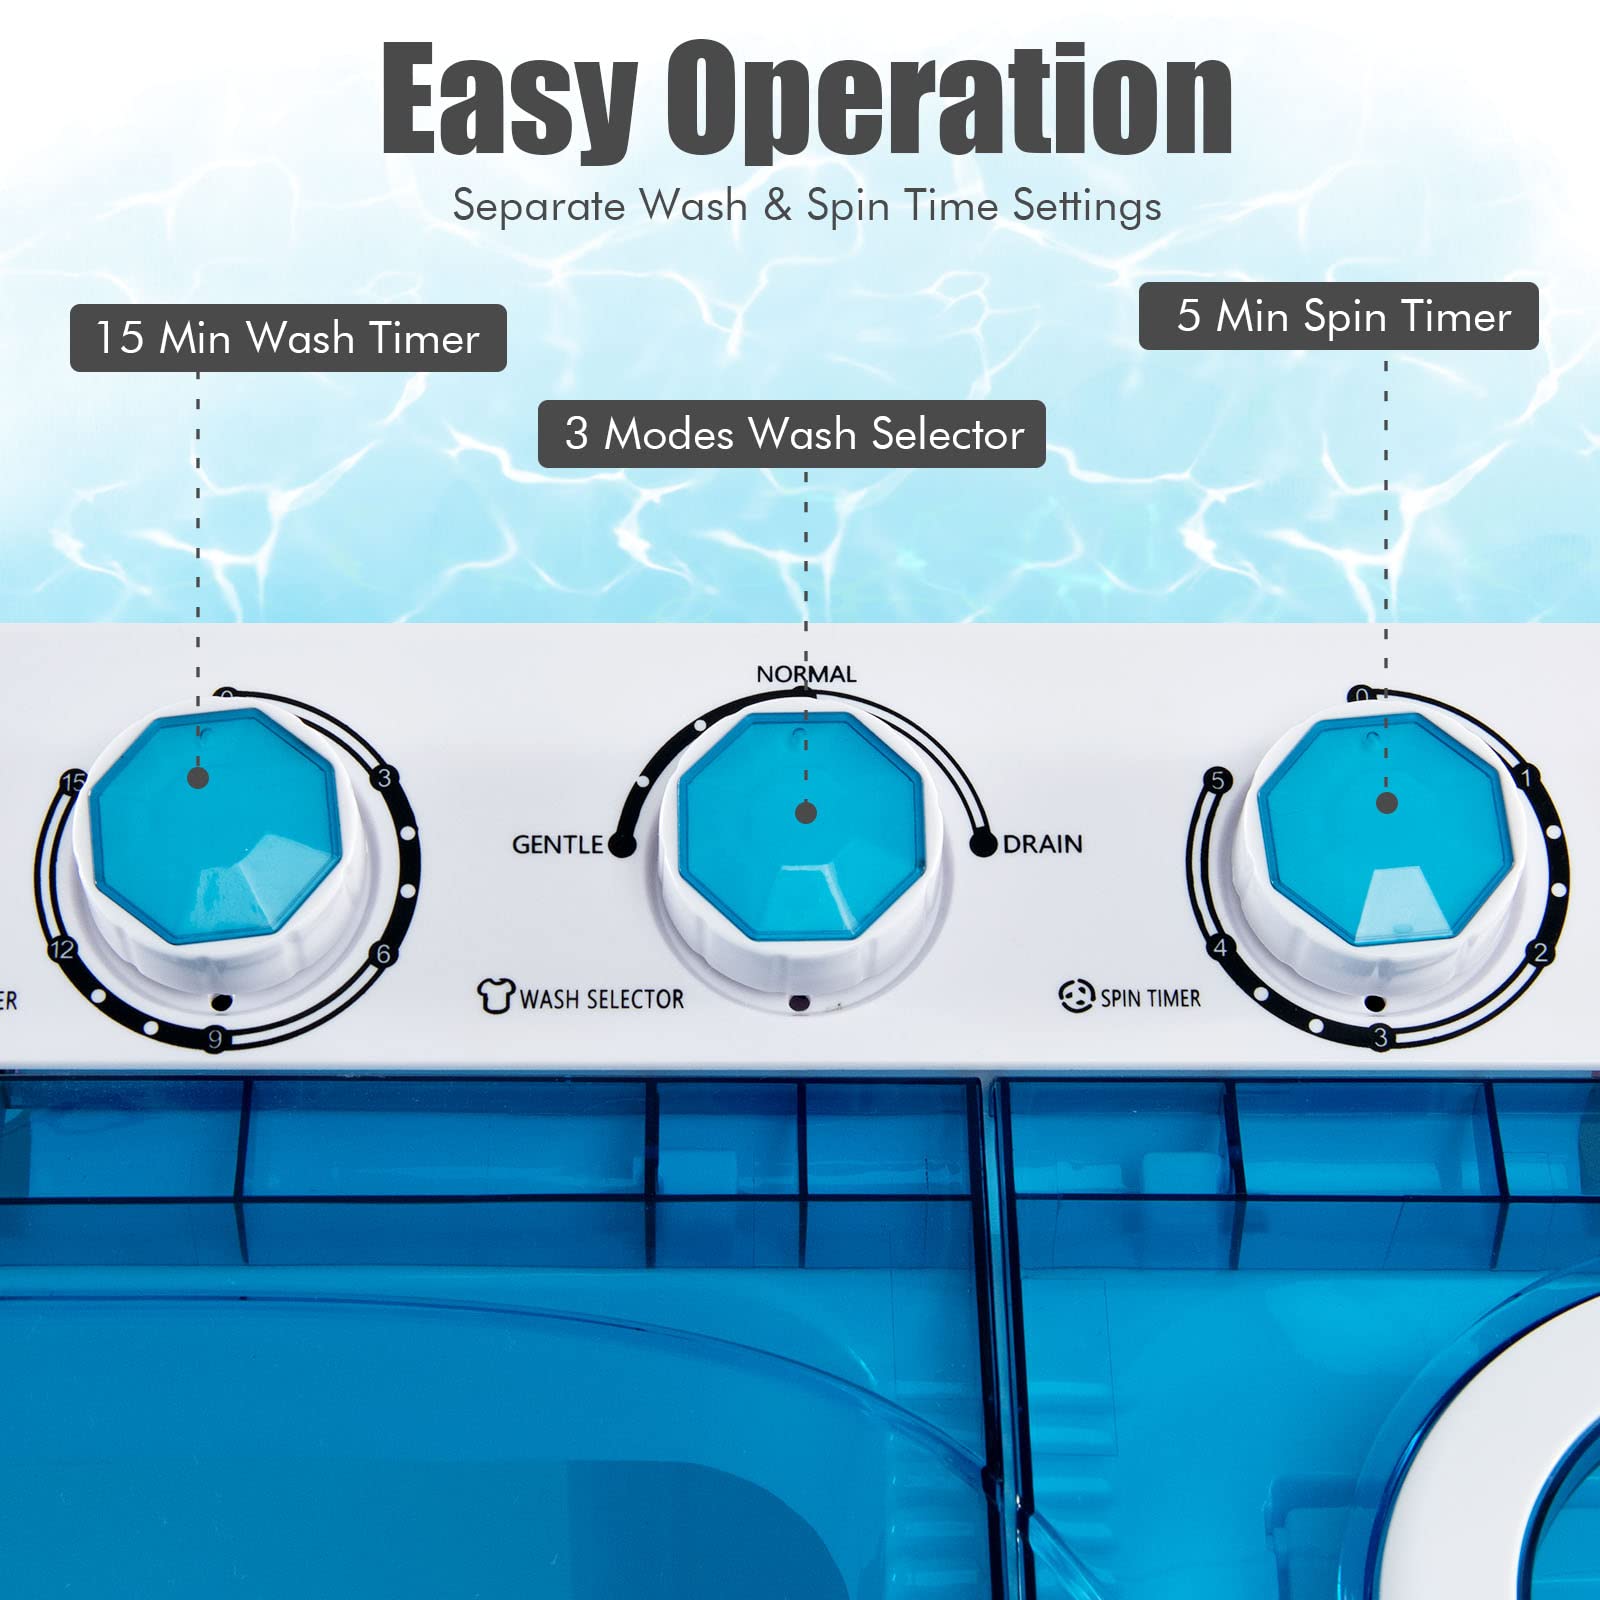 COSTWAY Portable Washing Machine, 2-in-1 Twin Tub 26lbs Capacity Washer(18lbs) and Spinner(8lbs) with Control Knobs, Timer Function, Drain Pump, Compact Laundry Washer for Home Apartment RV, Blue